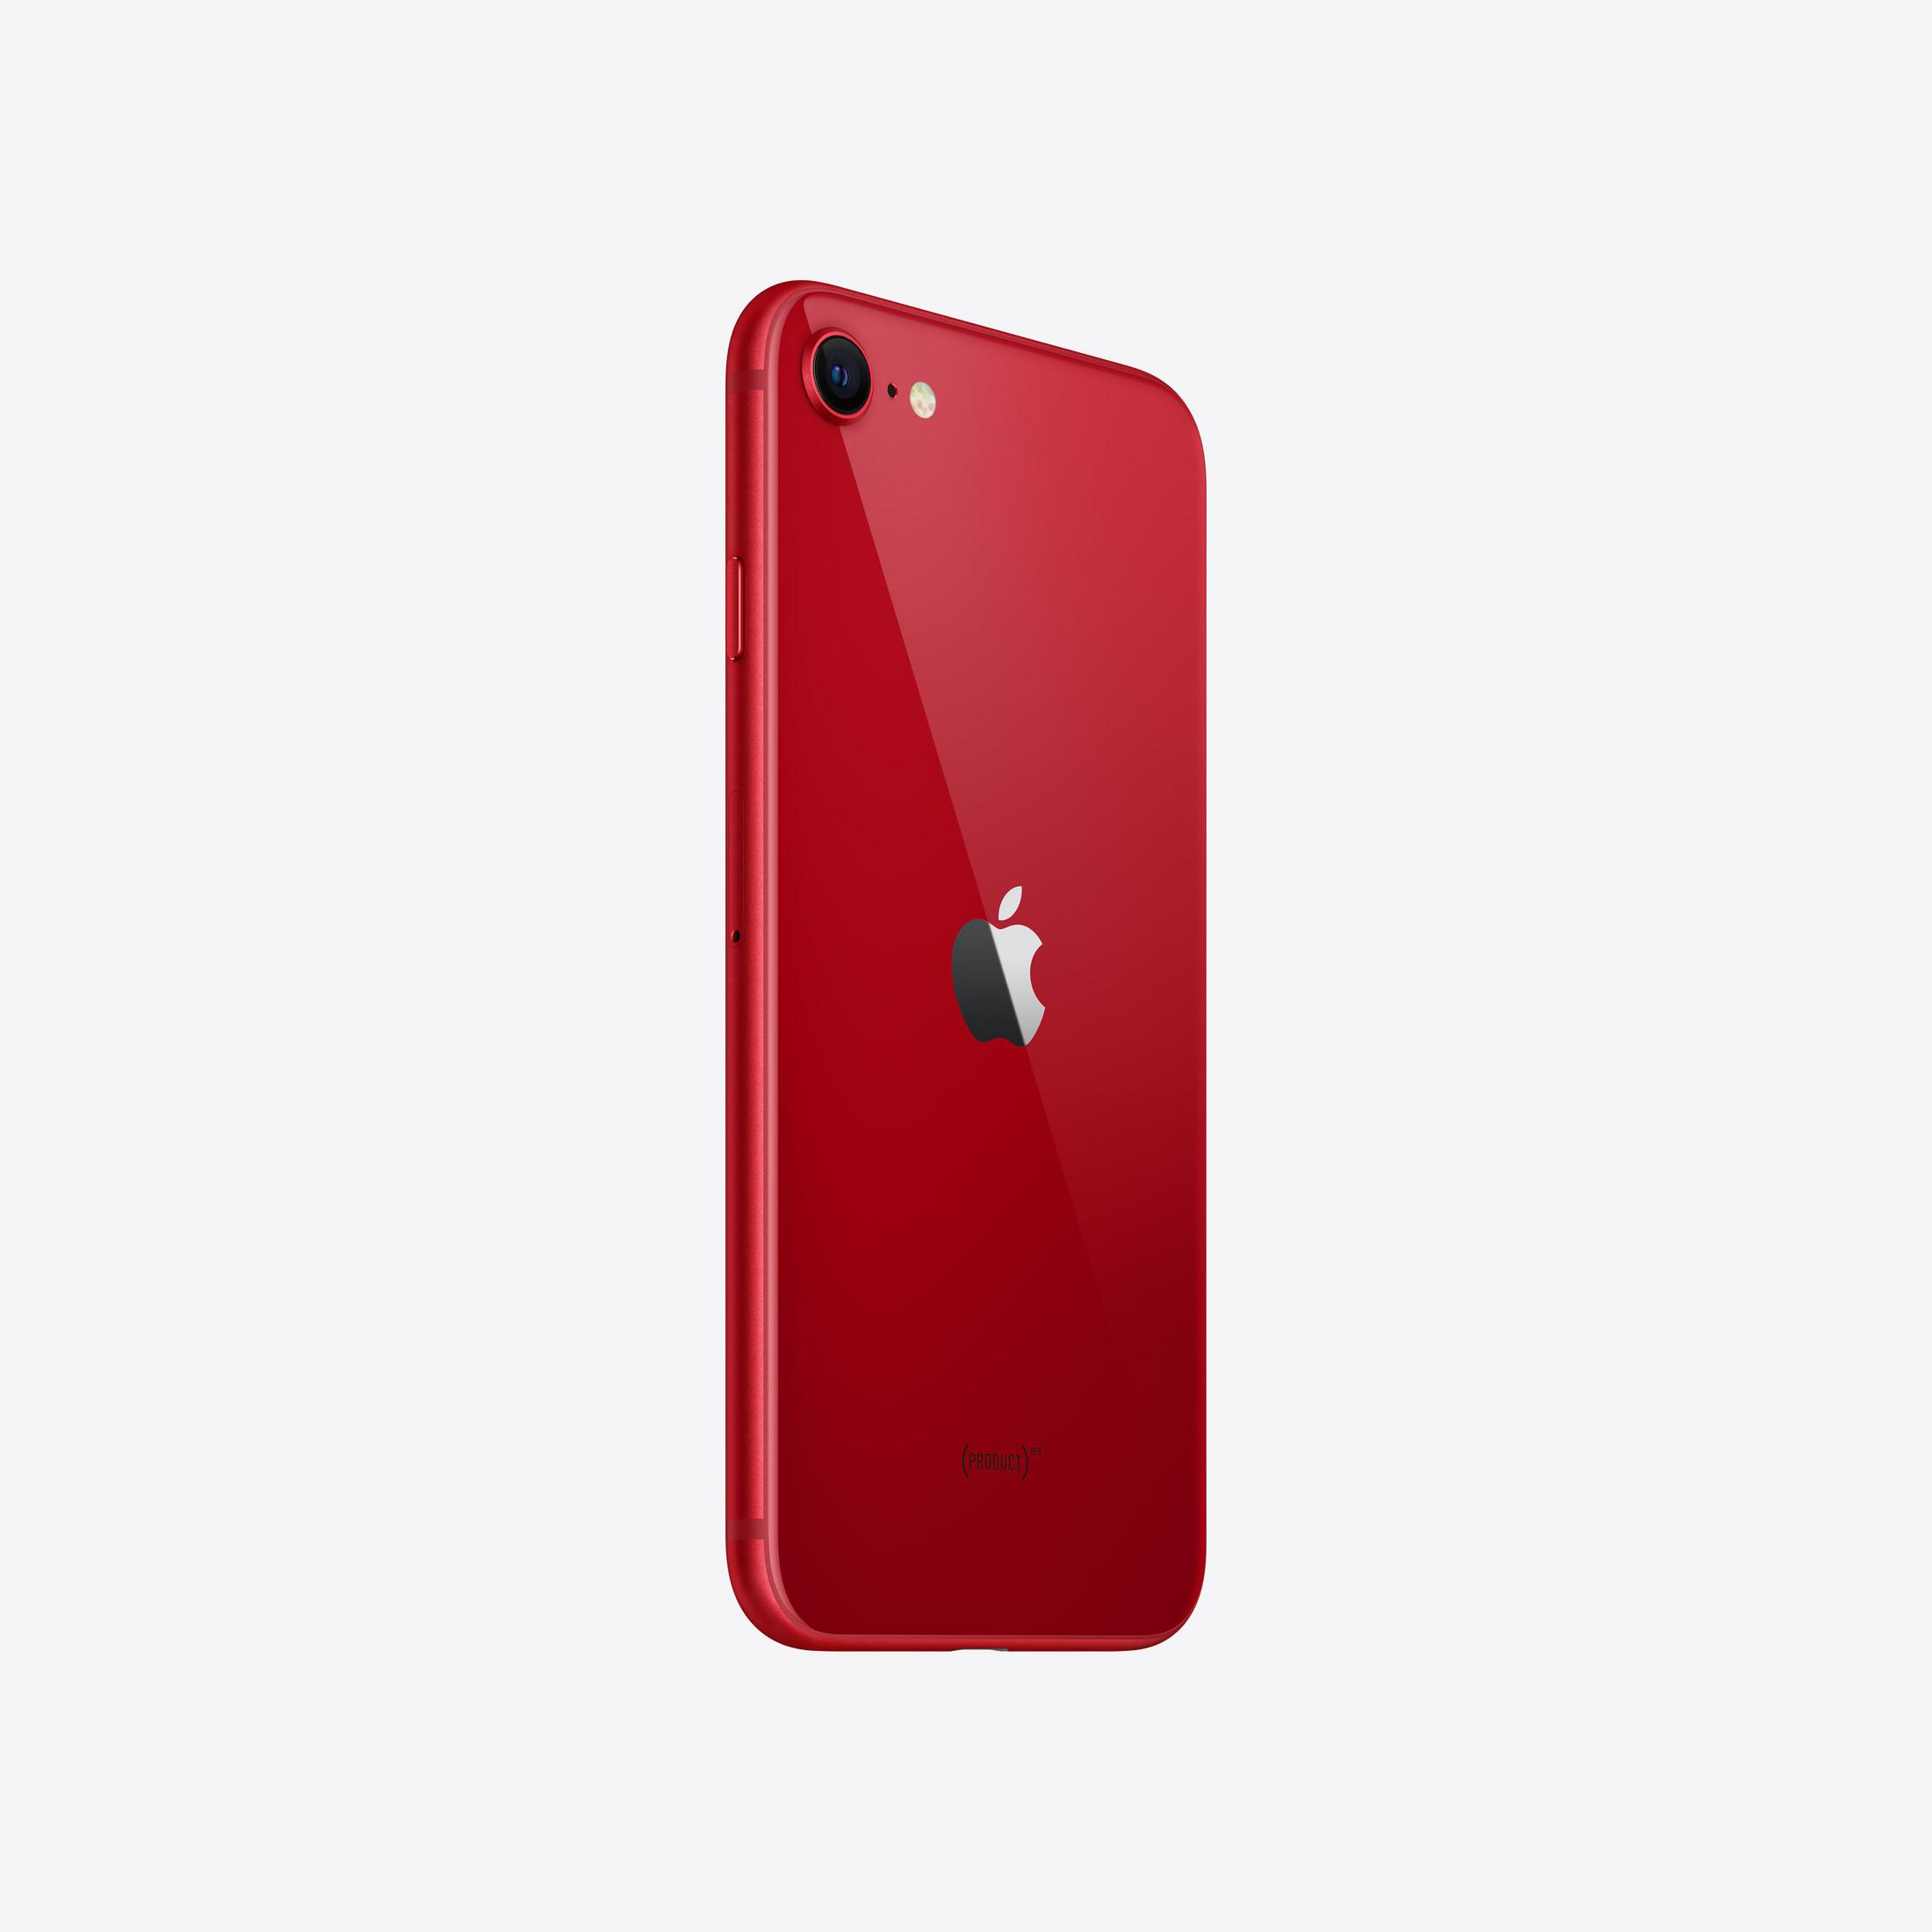 APPLE IPHONE SE Red 256 (PRODUCT) RED (Product) 256GB GB